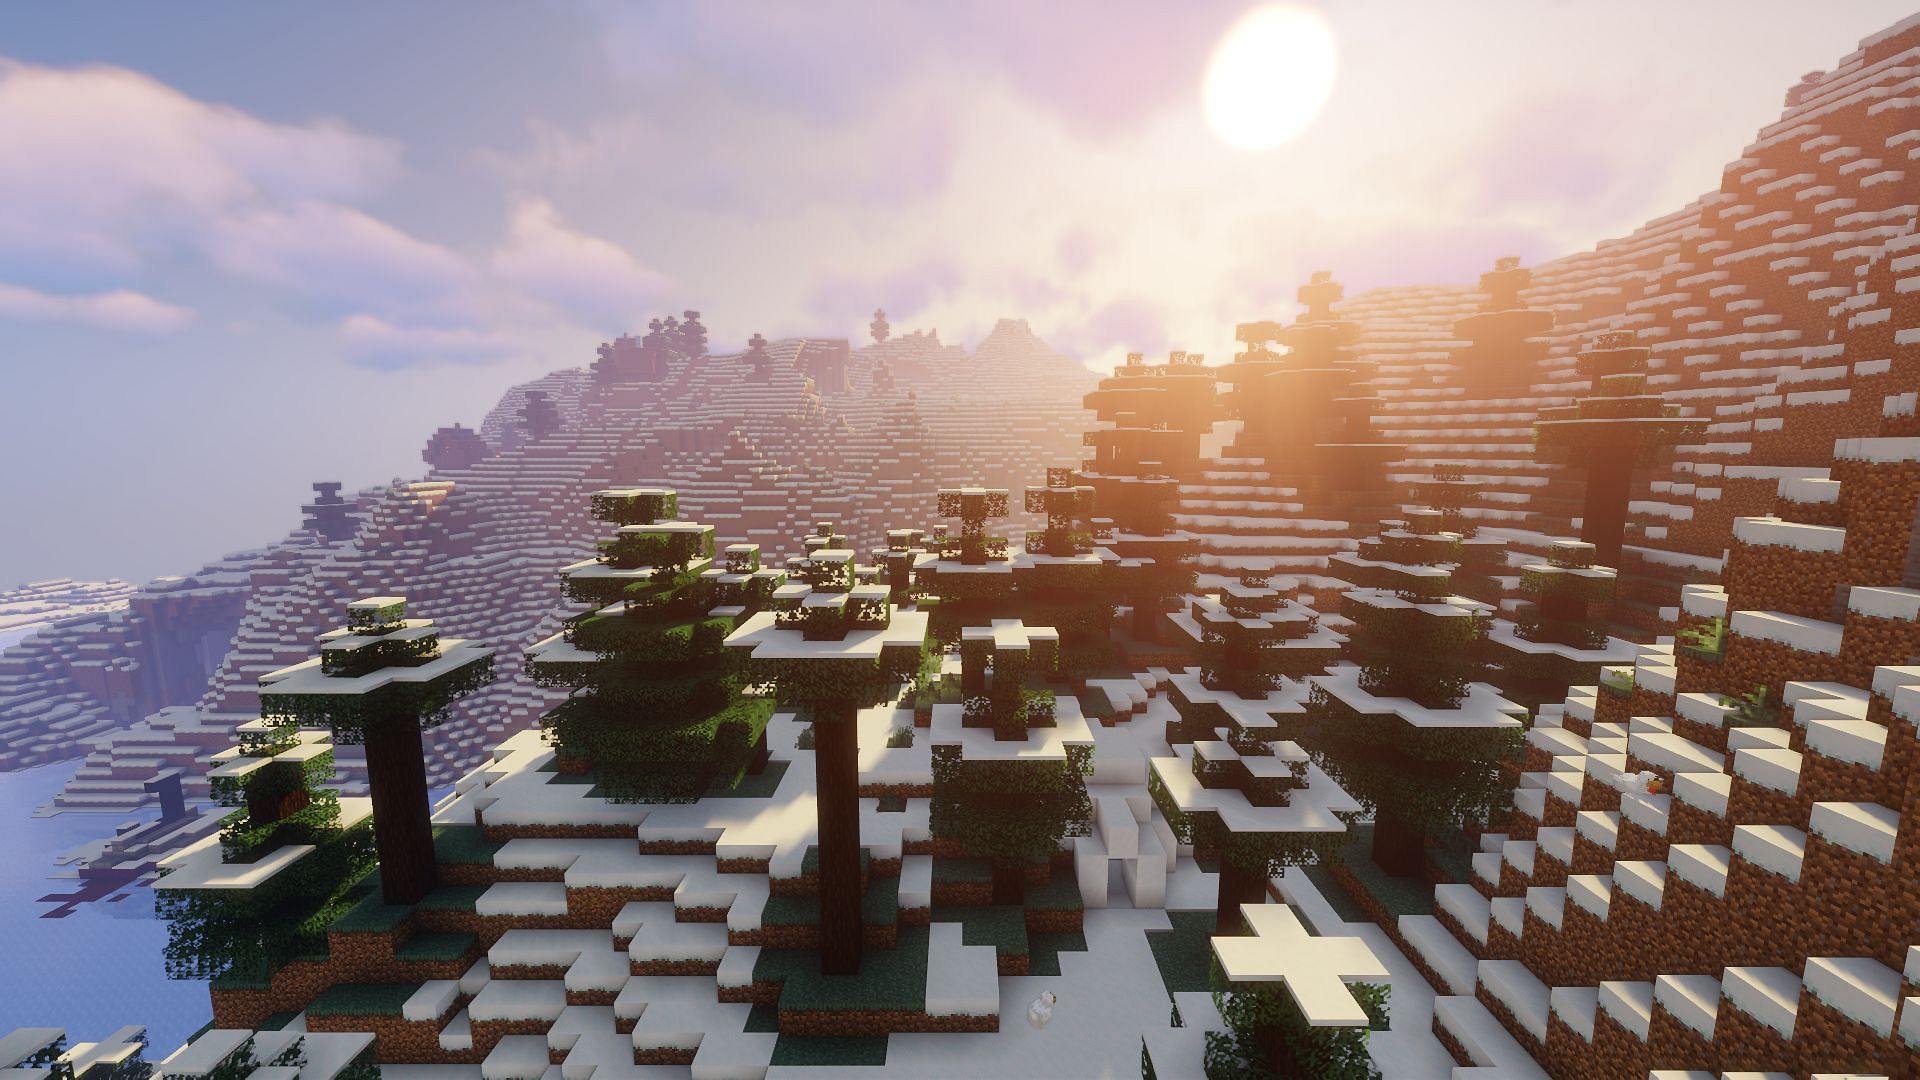 A mountain igloo and village were found on the seed (Image via Minecraft)